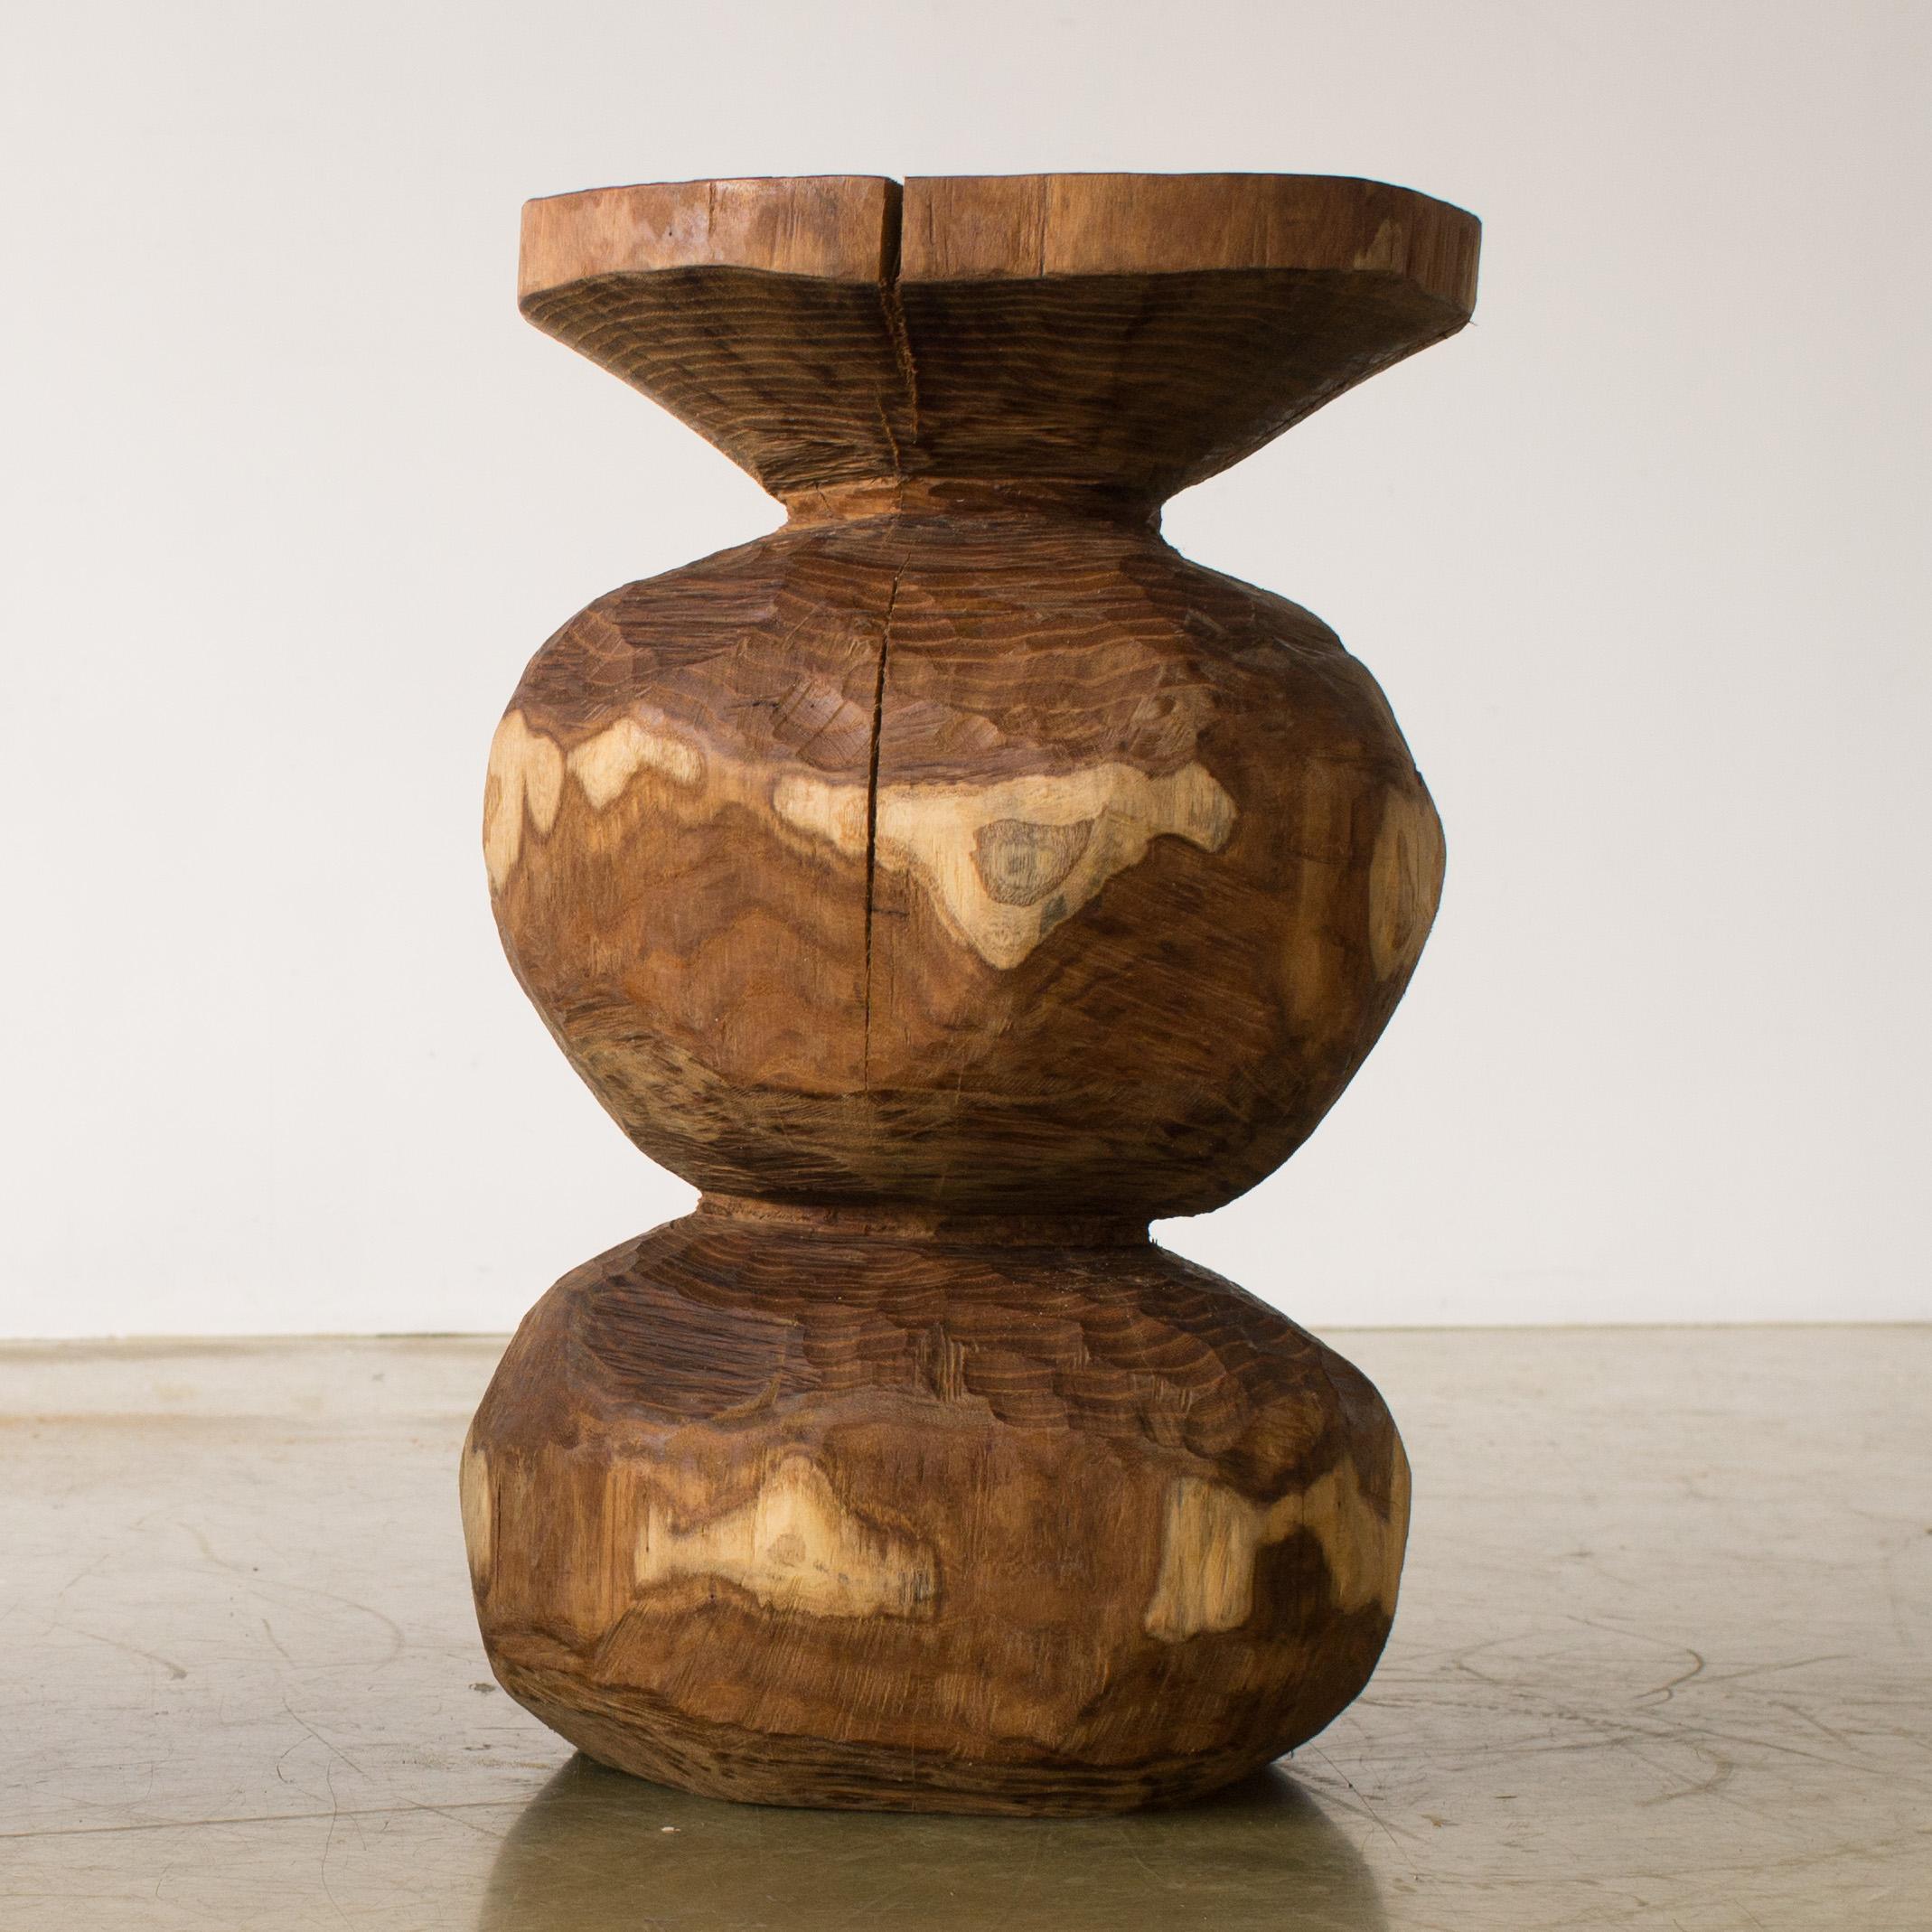 Name: Mamma
Sculptural stool by Hiroyuki Nishimura and zone carved furniture
Material: Walnut
This work is carved from log with some kinds of chainsaws.
Most of wood used for Nishimura's works are unable to use anything, these woods are